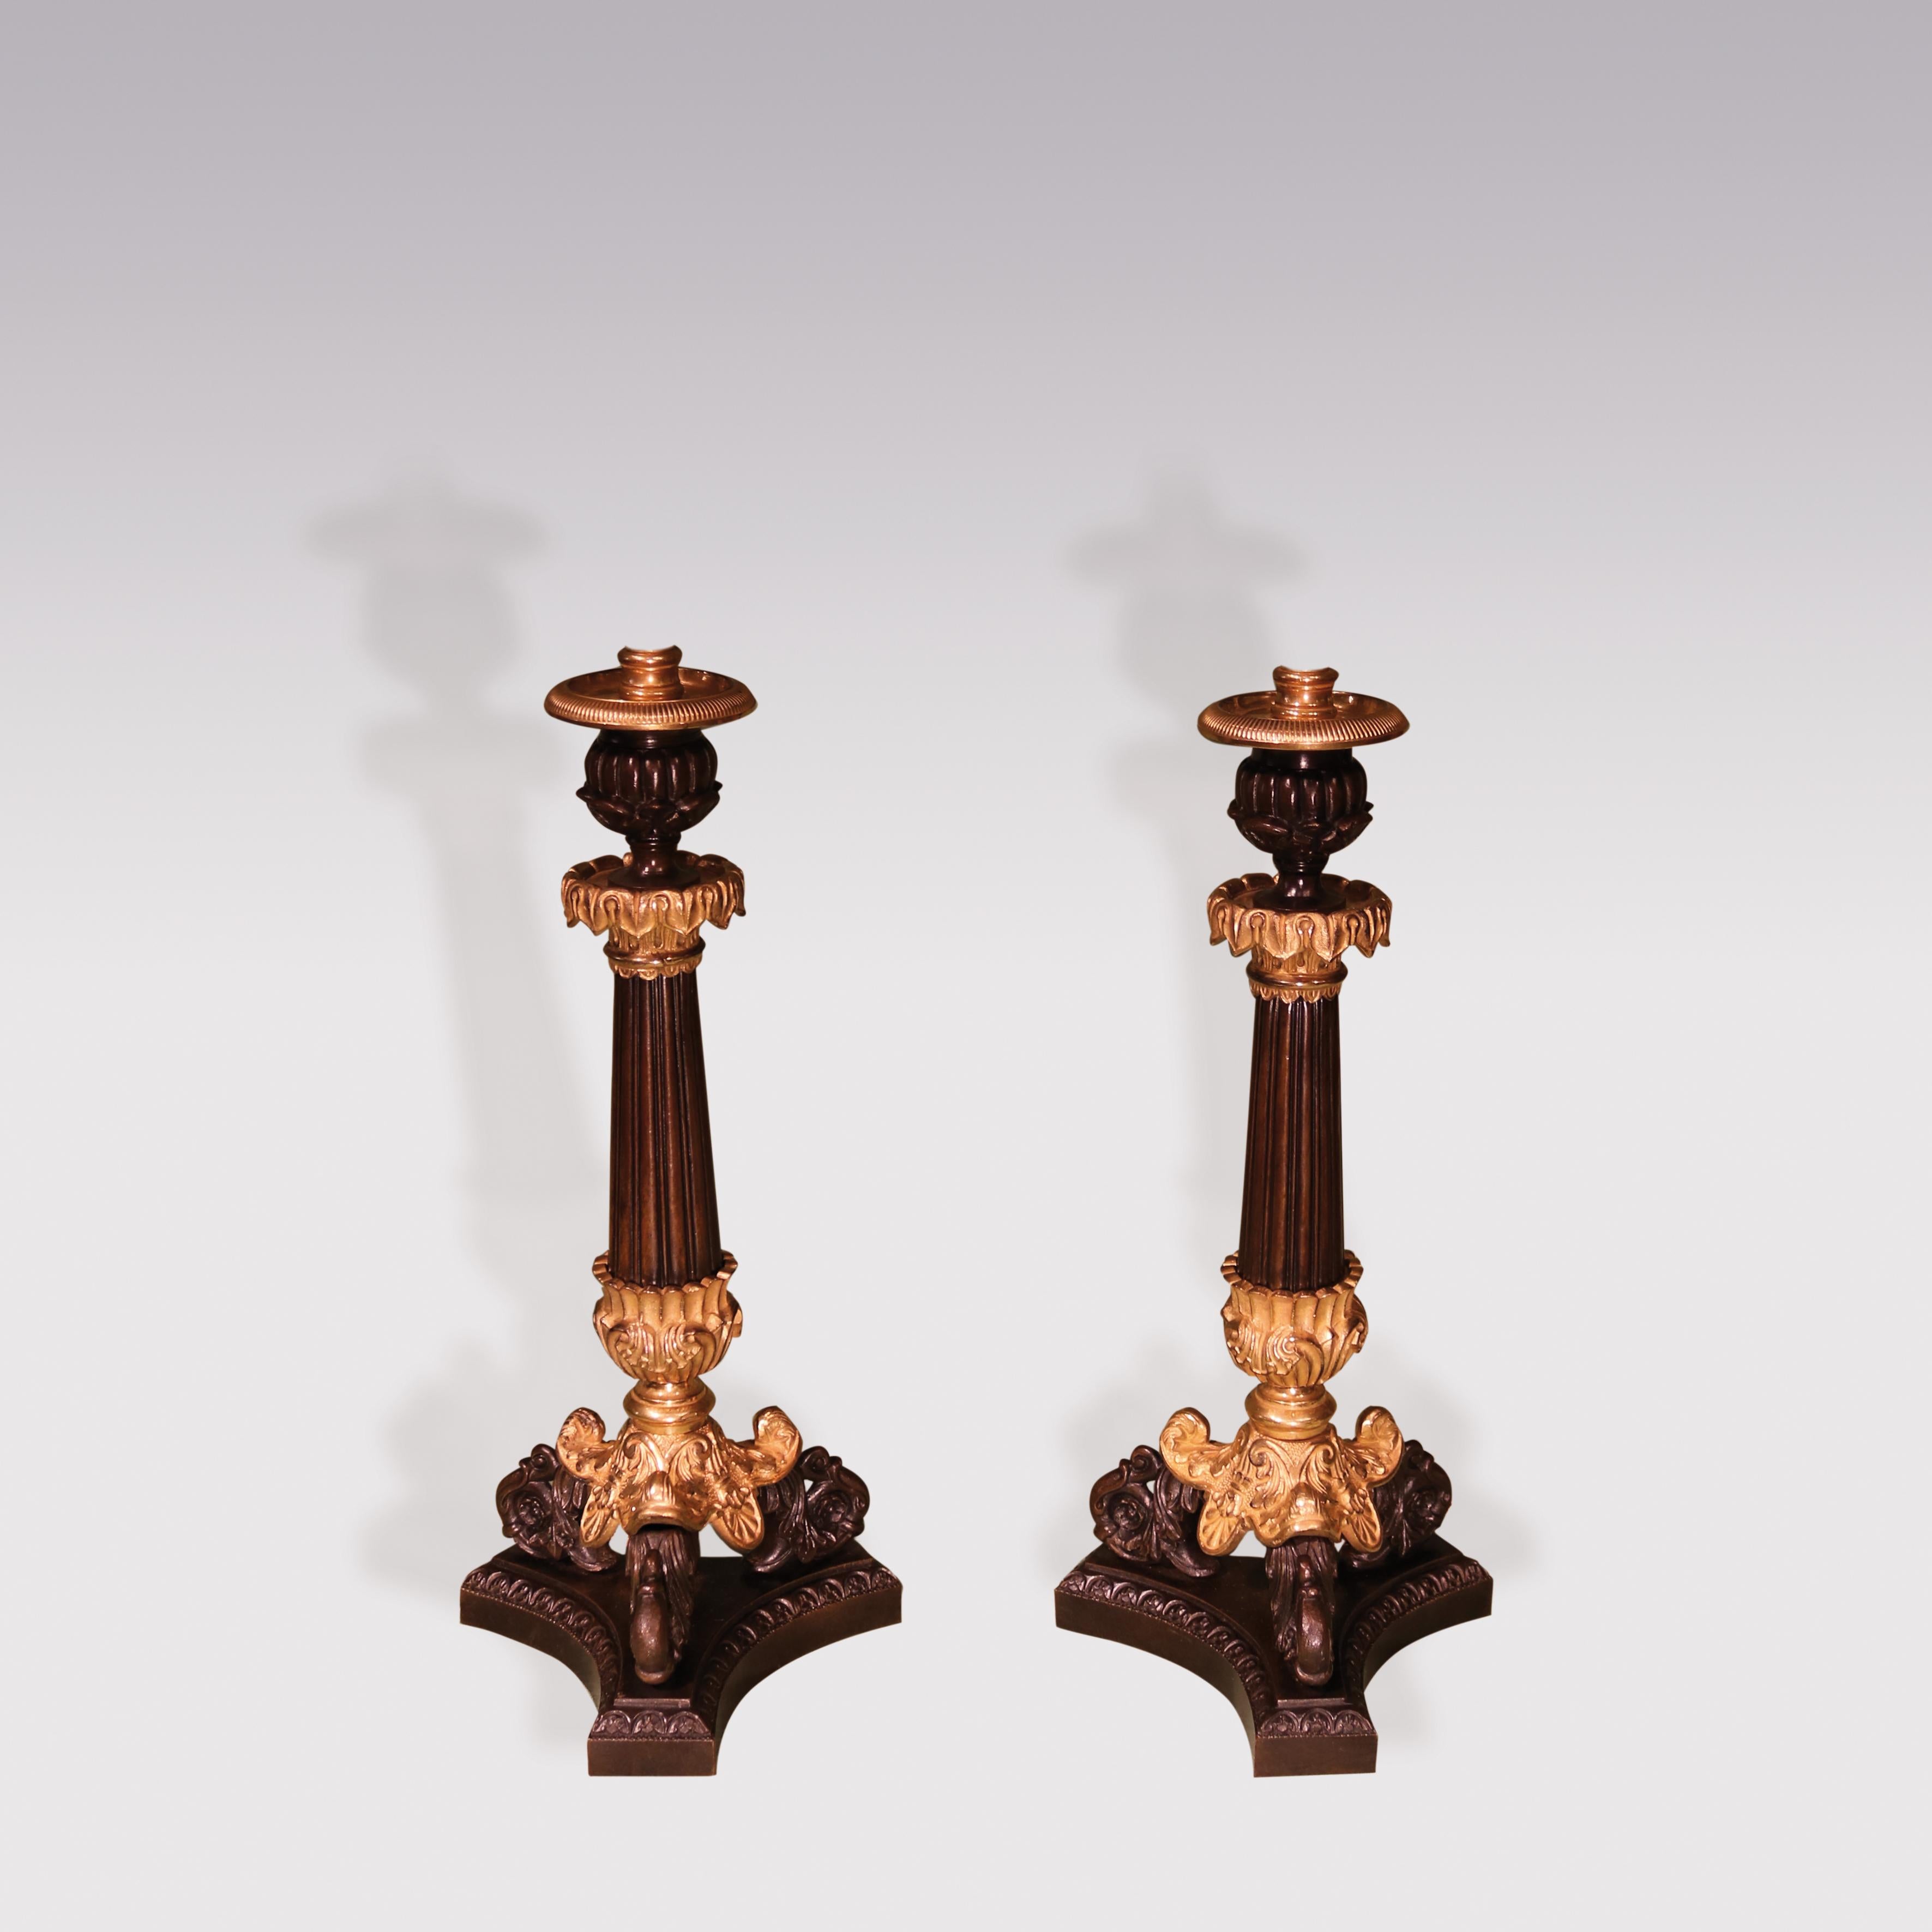 A pair of early 19th century bronze and Ormolu candlesticks, having leaf-decorated nozzles above reeded, tapering stems raised on acanthus scrolled triform feet ending on concave platform base. (Now converted to Lamps).